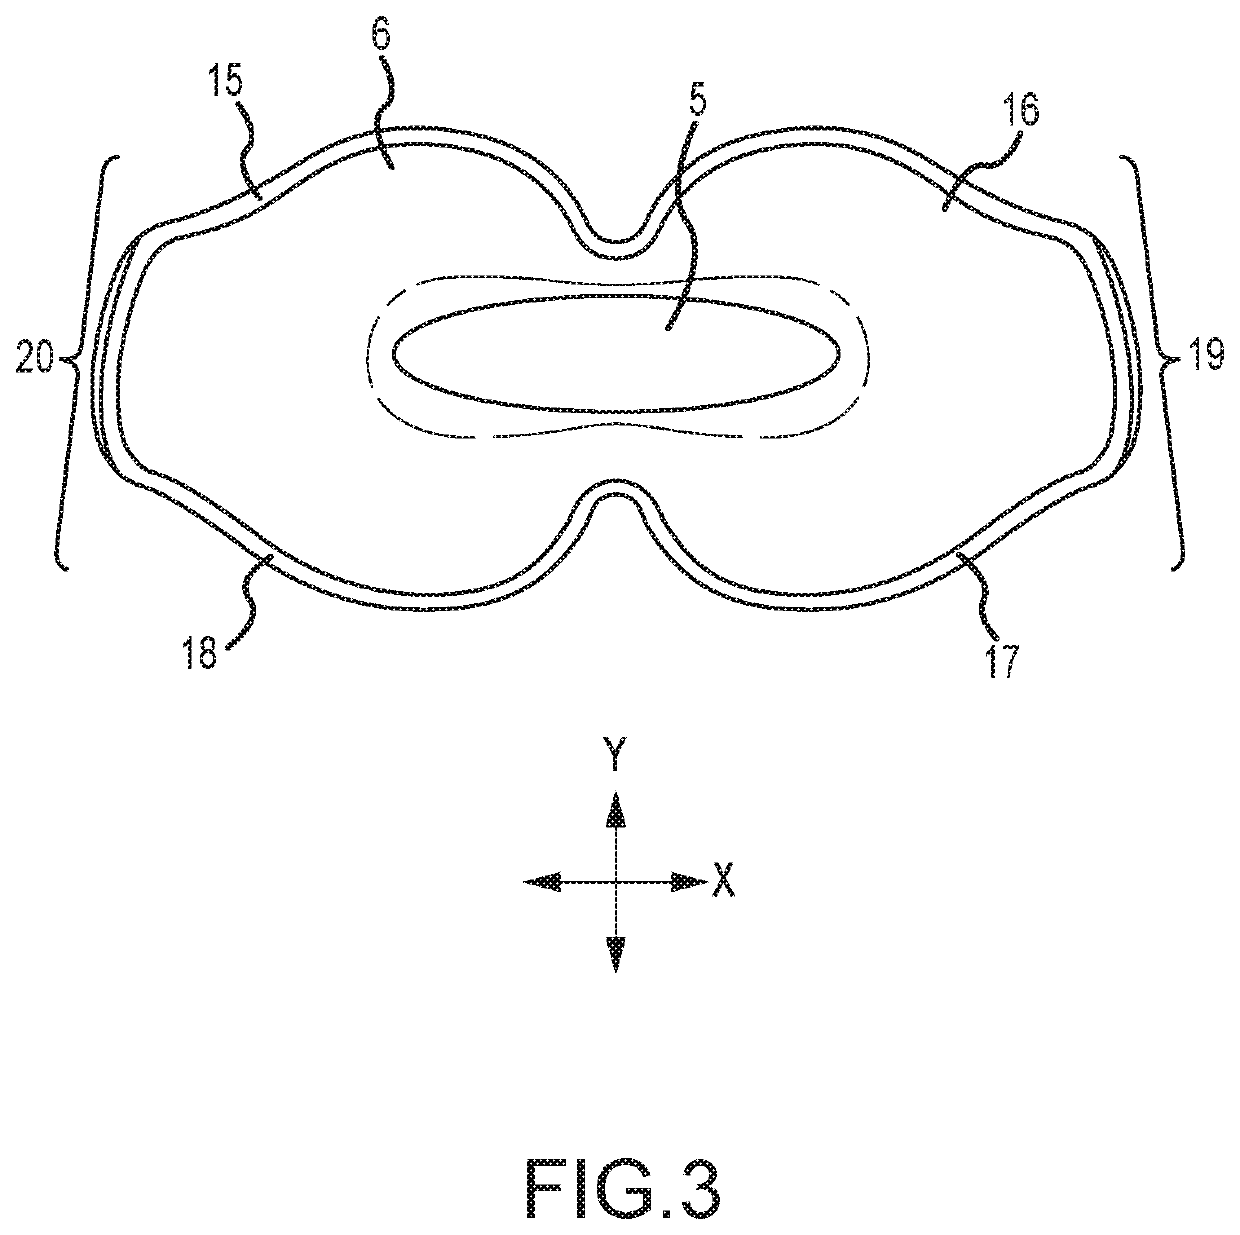 Oral and nasal devices for the treatment of sleep apnea and/or snoring with filter and sensors to provide remote digital monitoring and remote data analysis